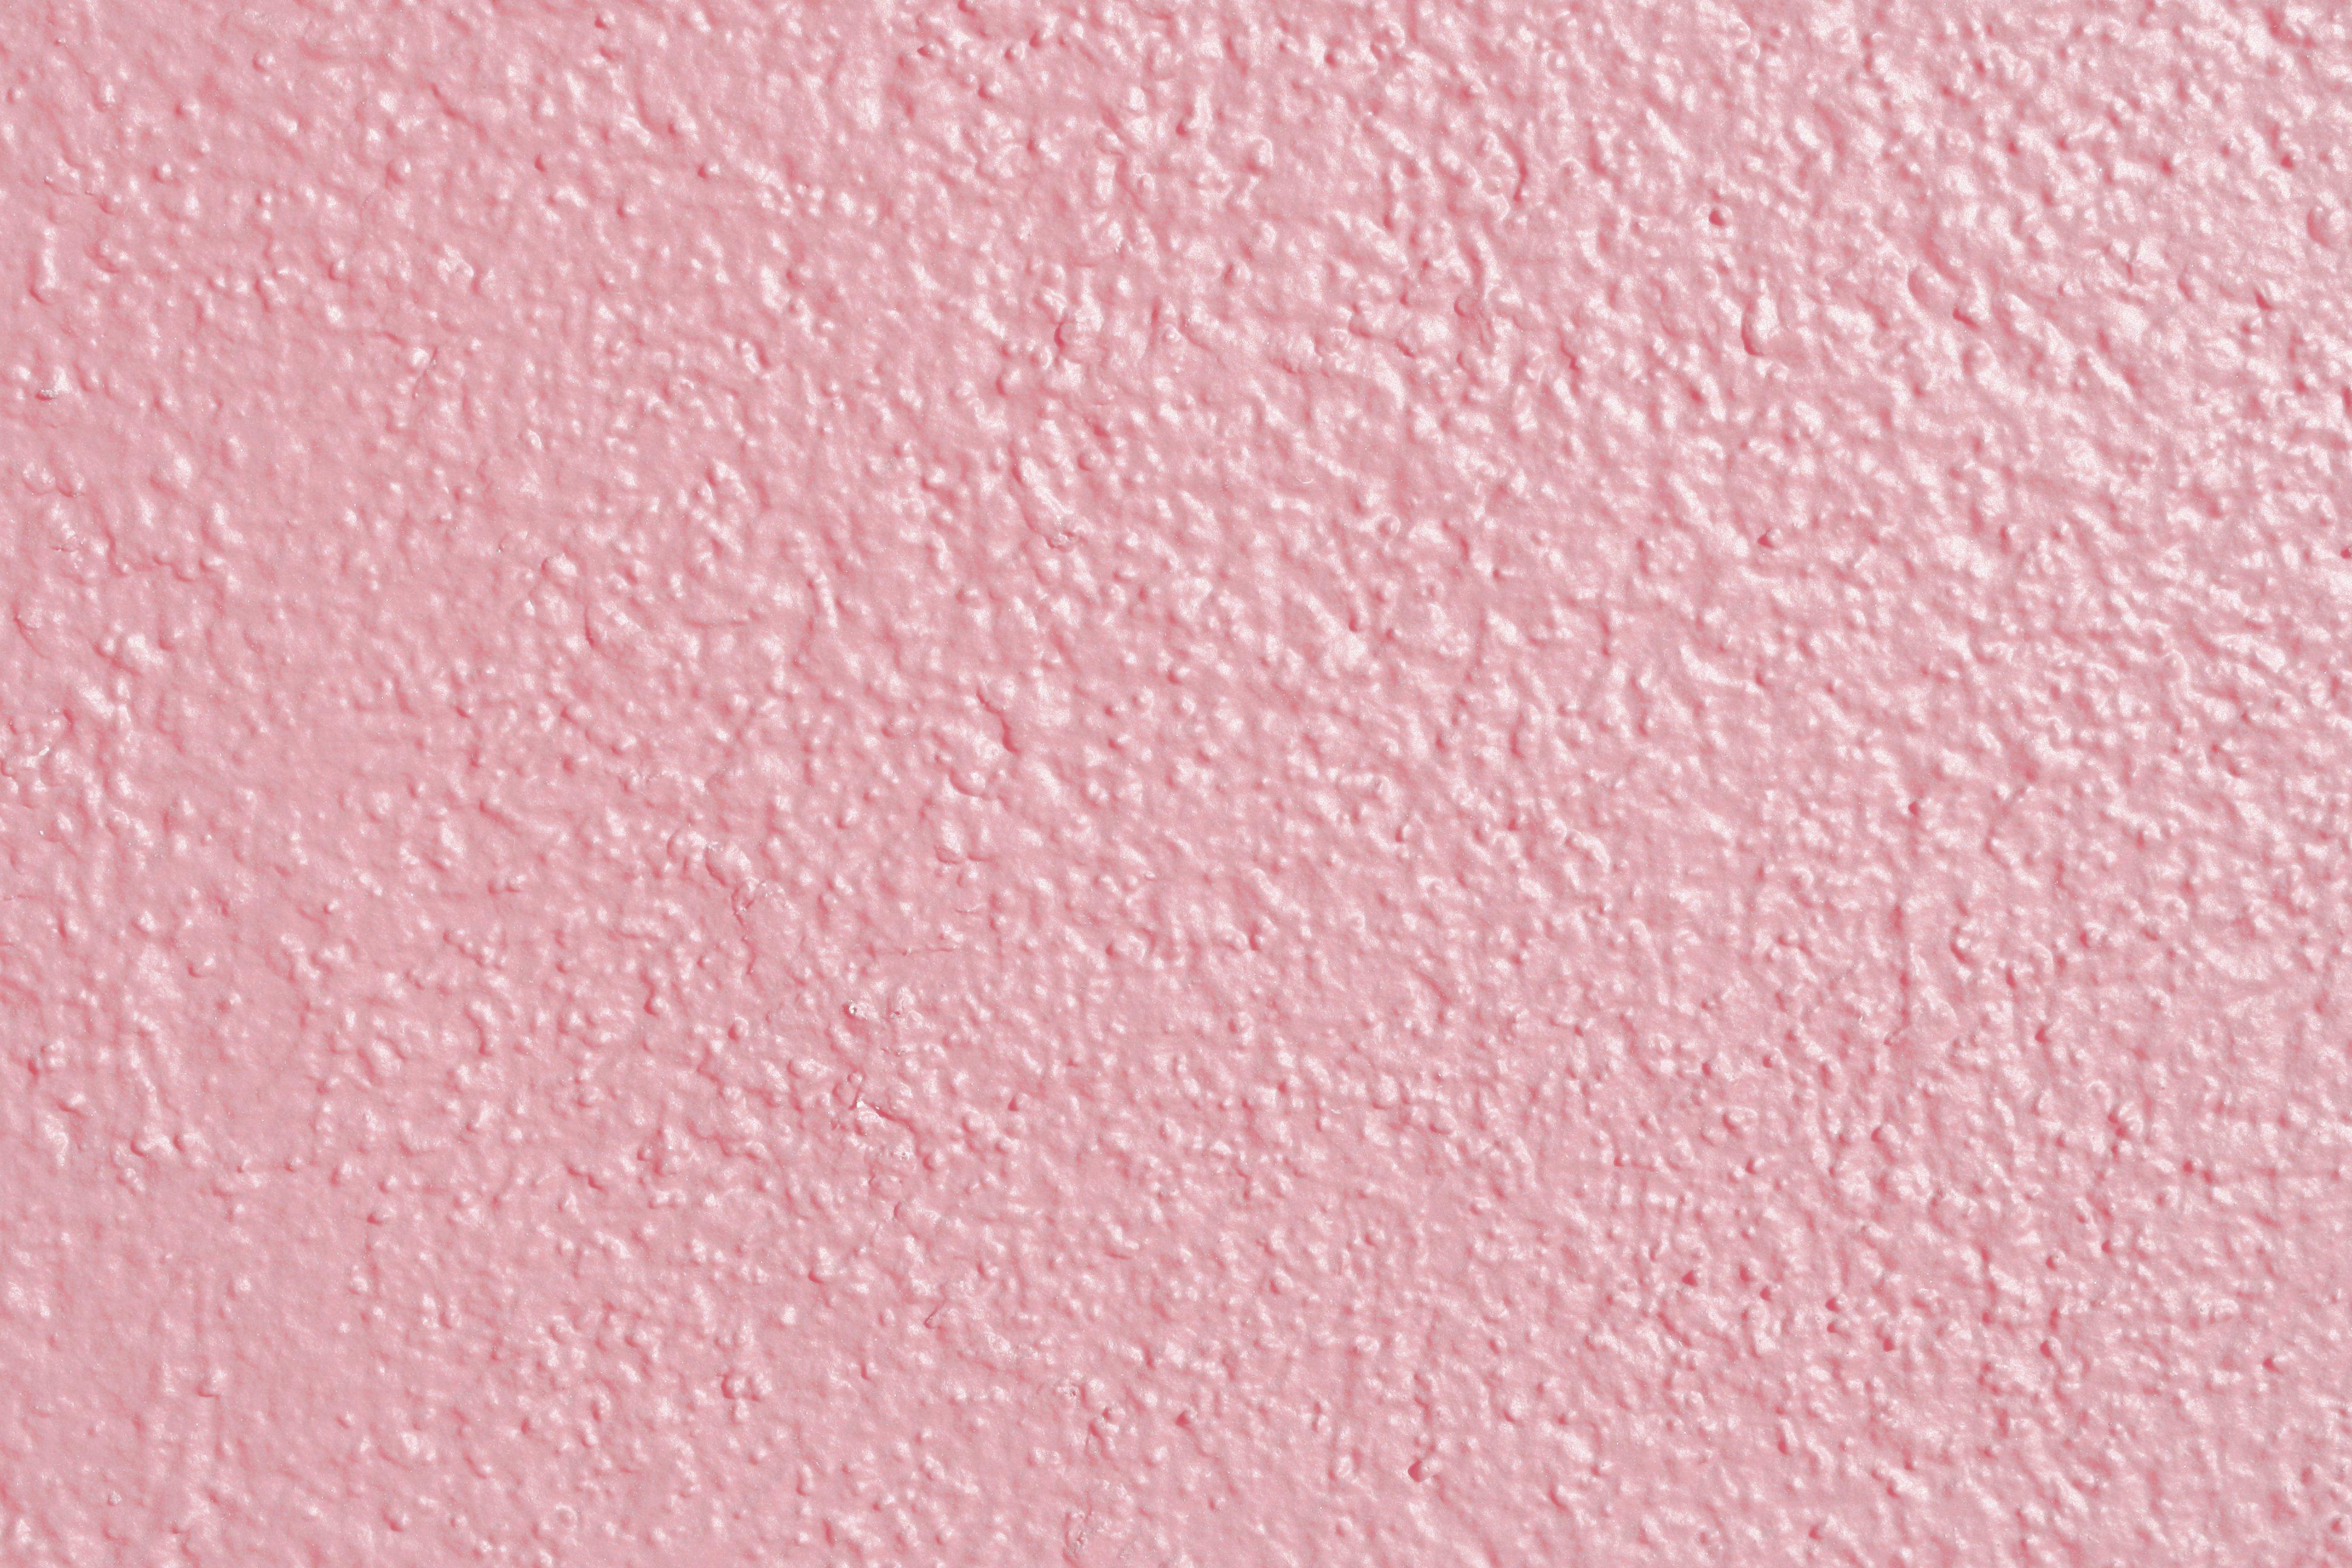 3888 x 2592 · jpeg - Pink Painted Wall Texture Picture | Free Photograph | Photos Public Domain